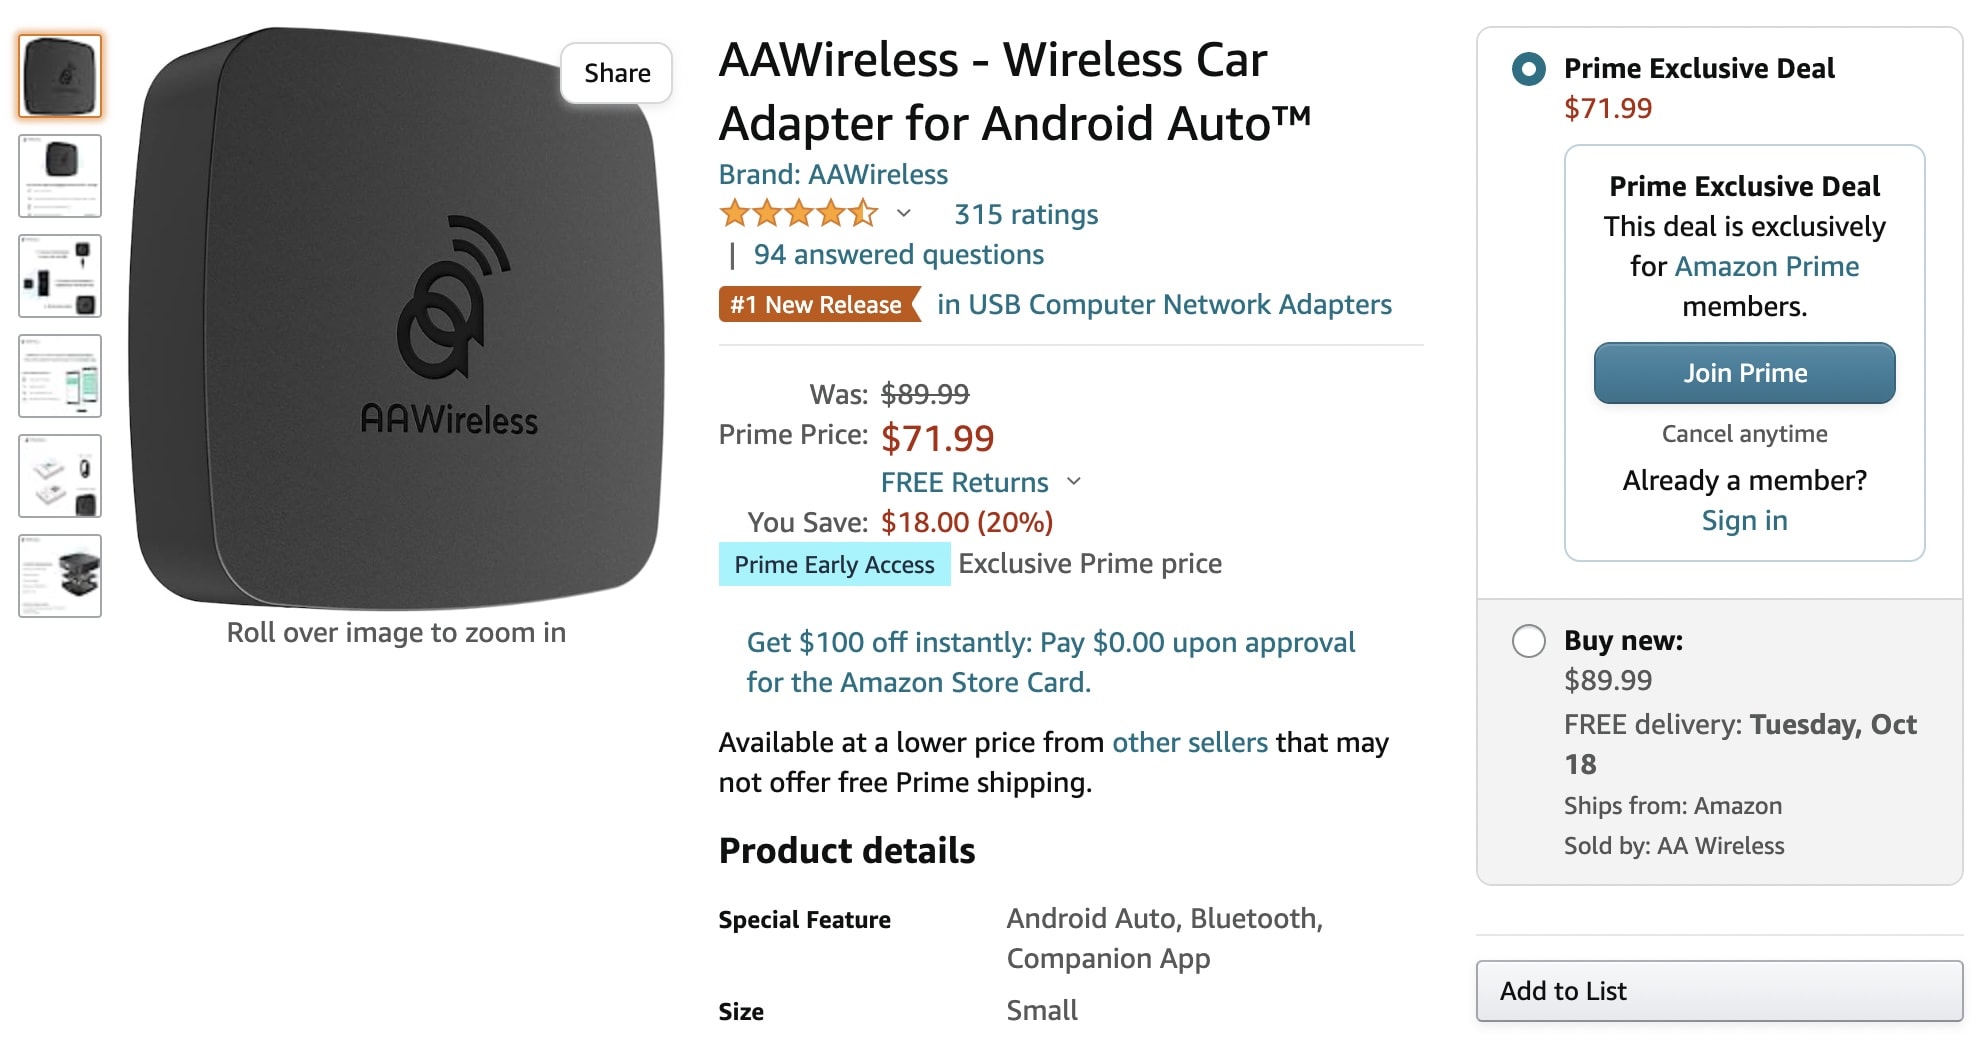 The World's Number One Android Auto Wireless Adapter Is Now